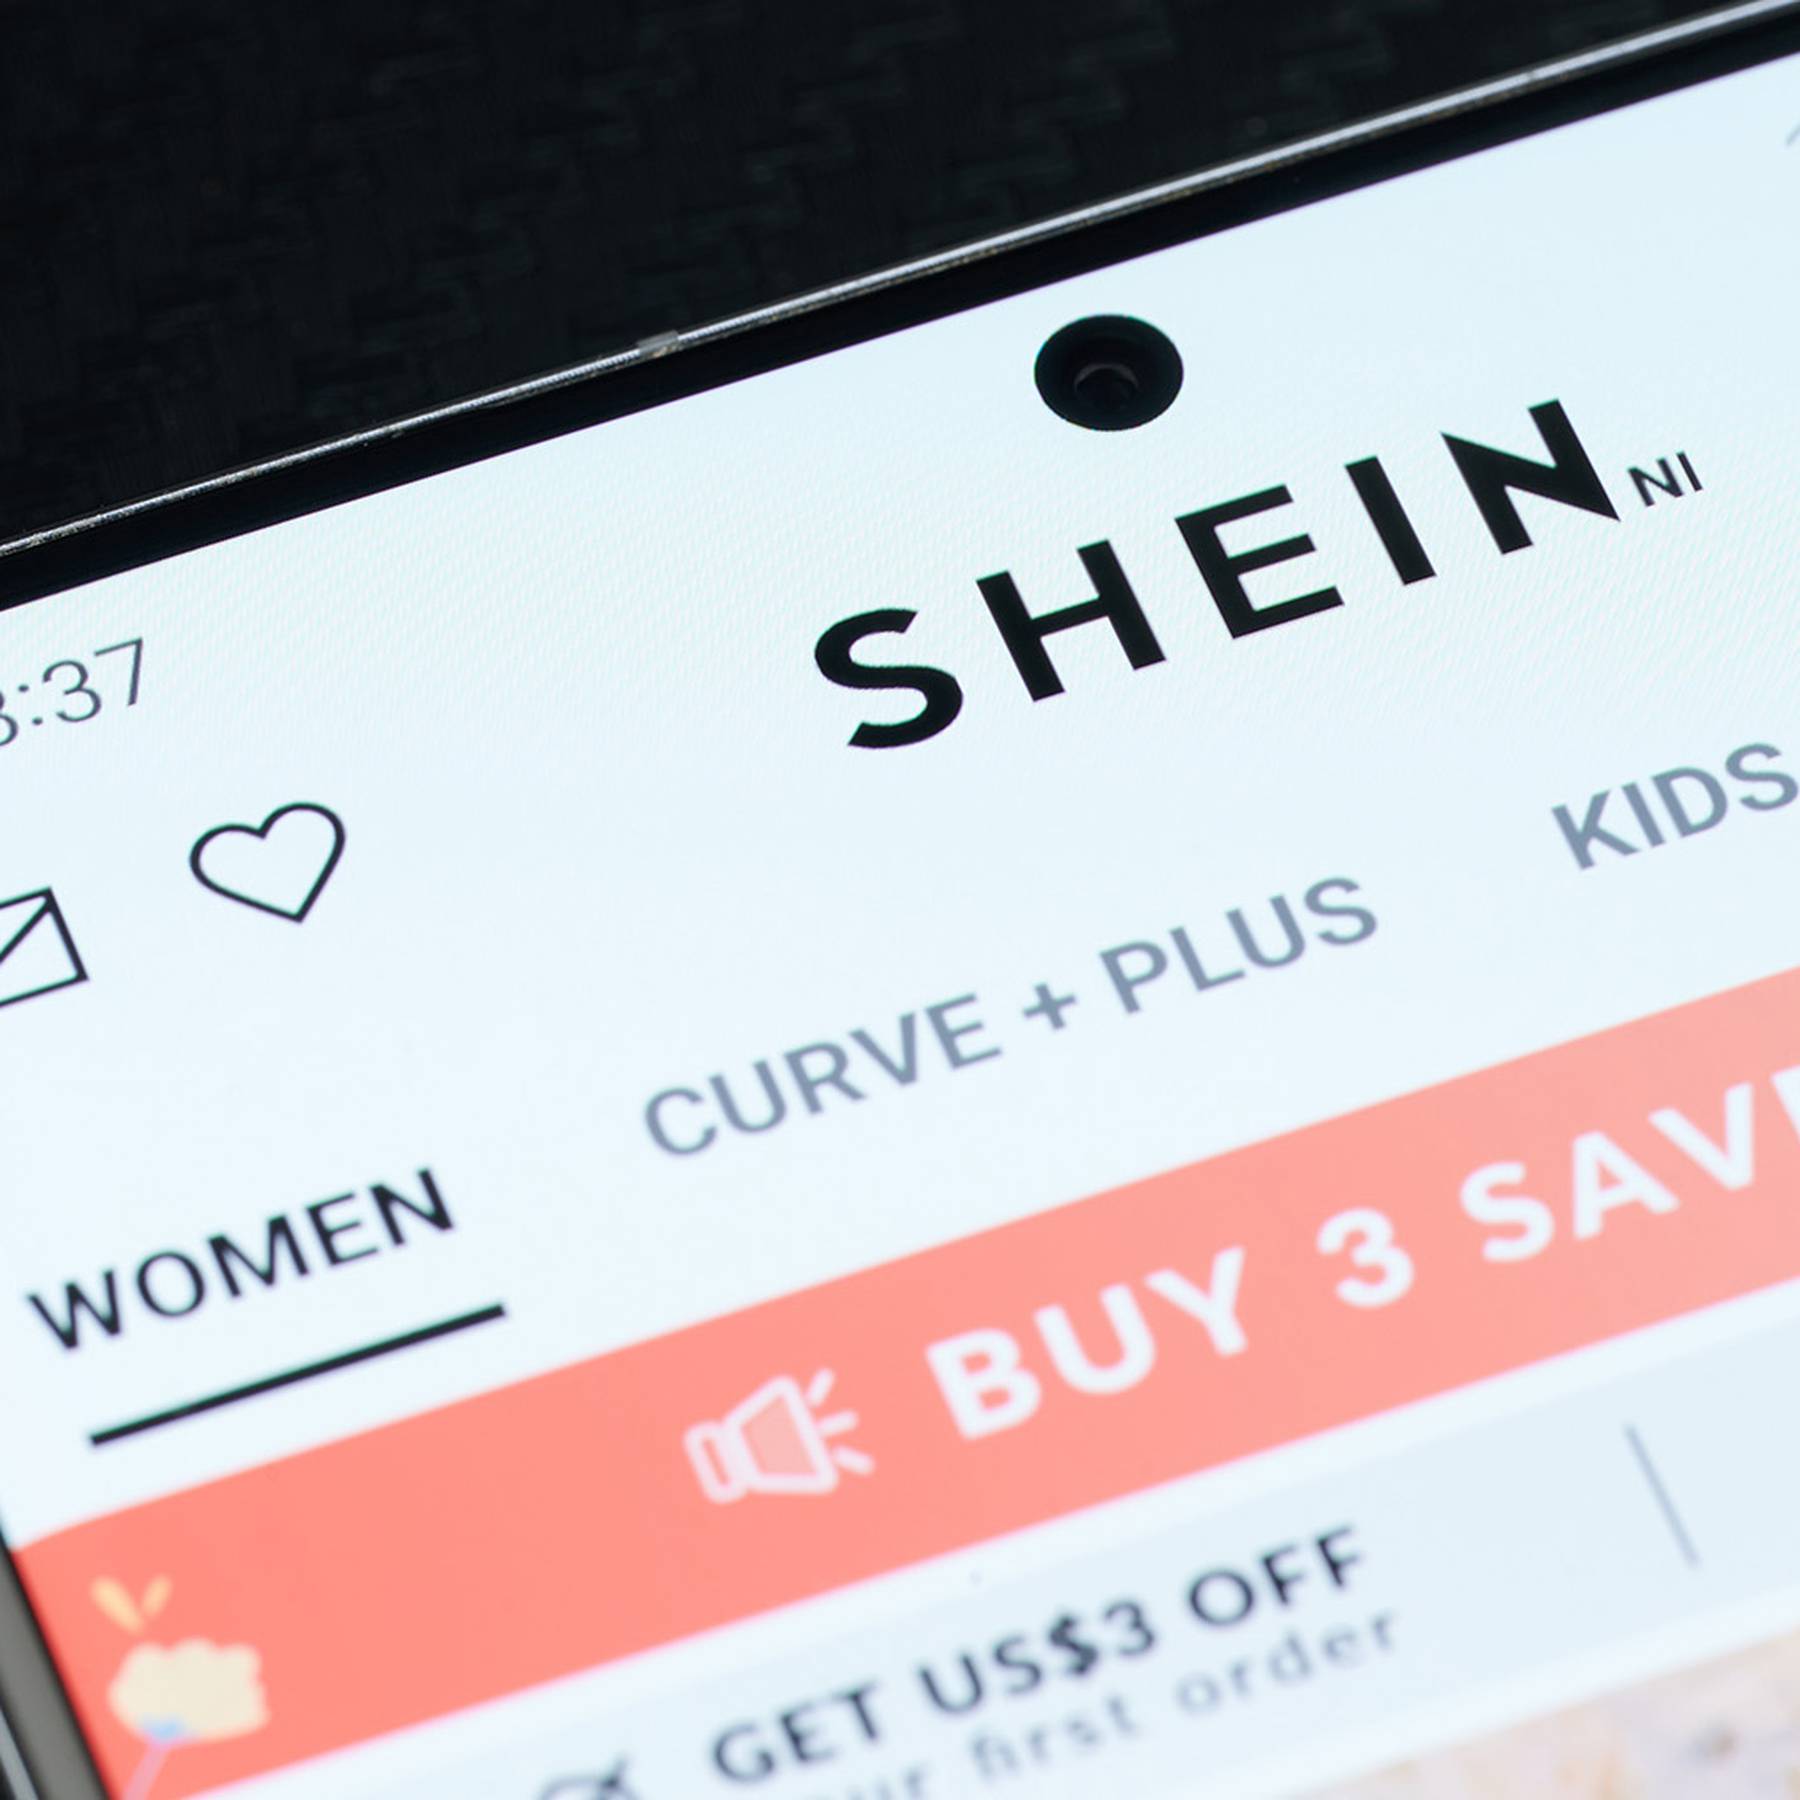 Shein to Market Supply Chain Infrastructure to Global Brands, WSJ